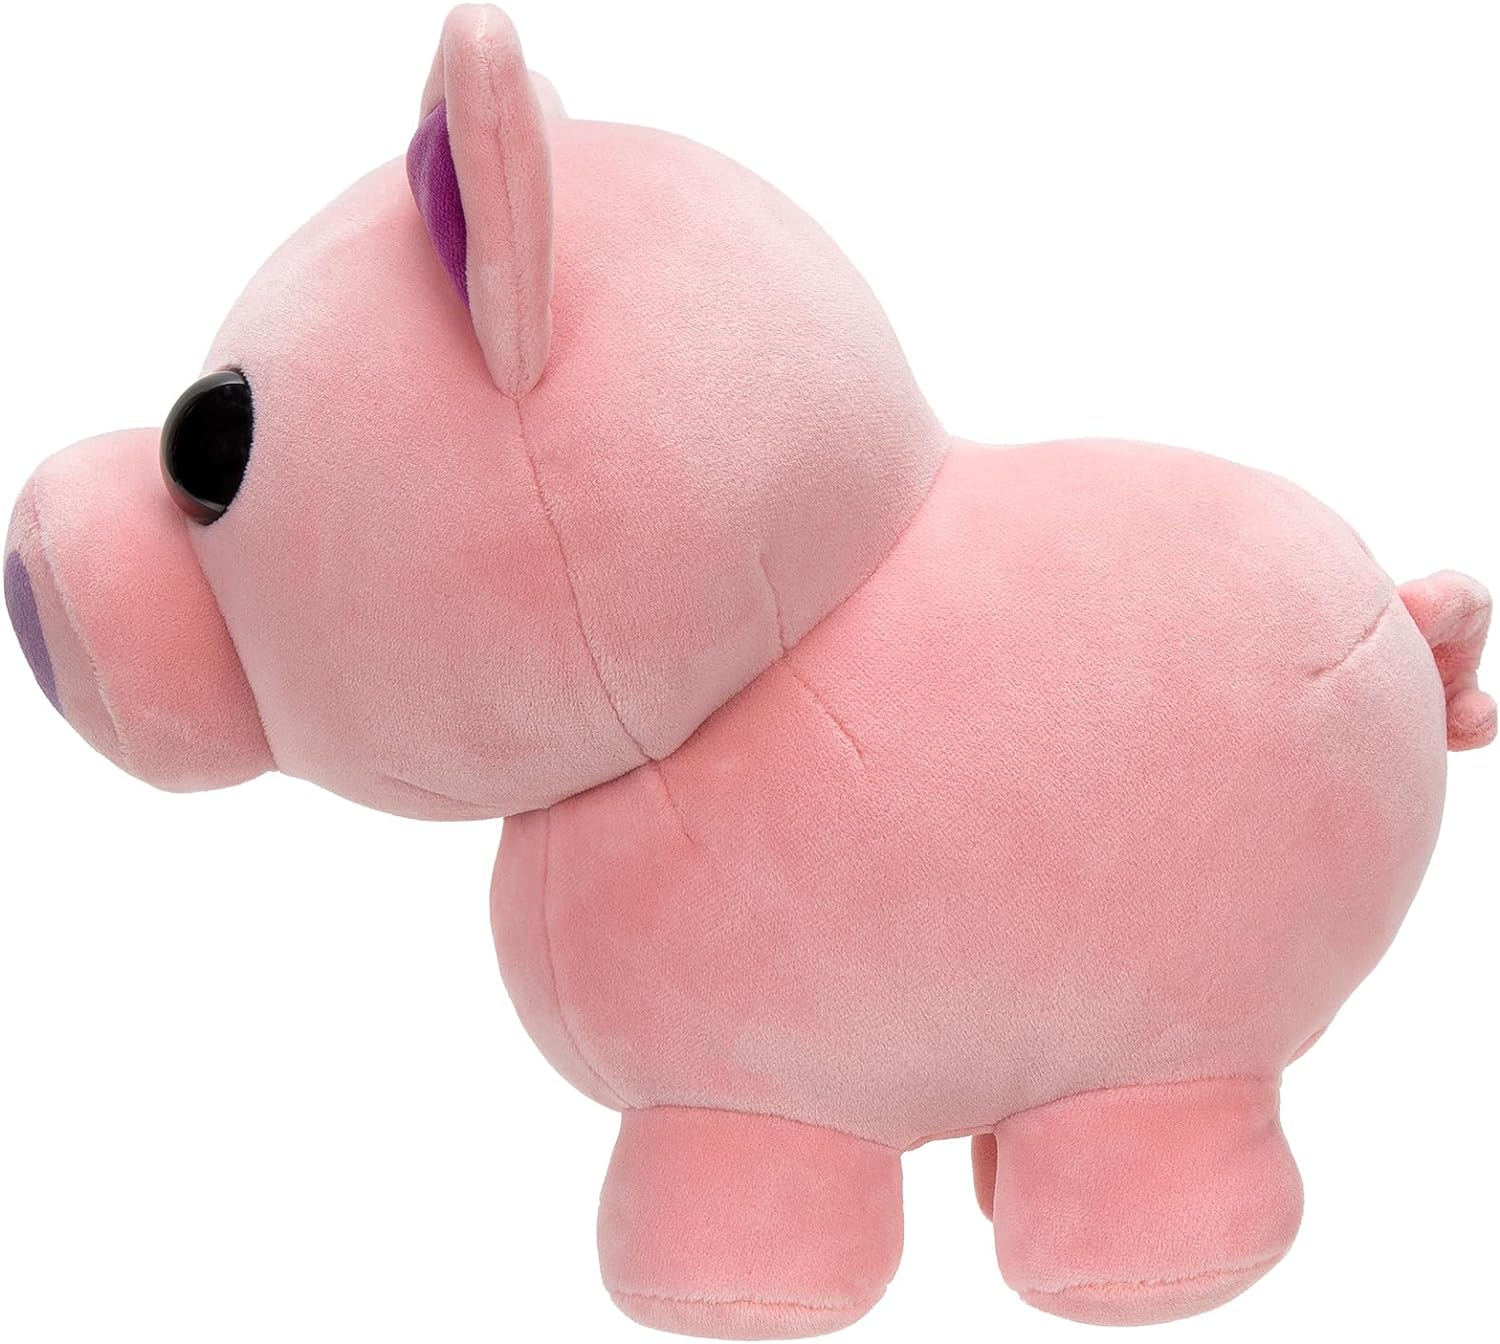 Adopt Me! PIG Series 3 Rare In-Game Stylization Collector Soft Plush Toy